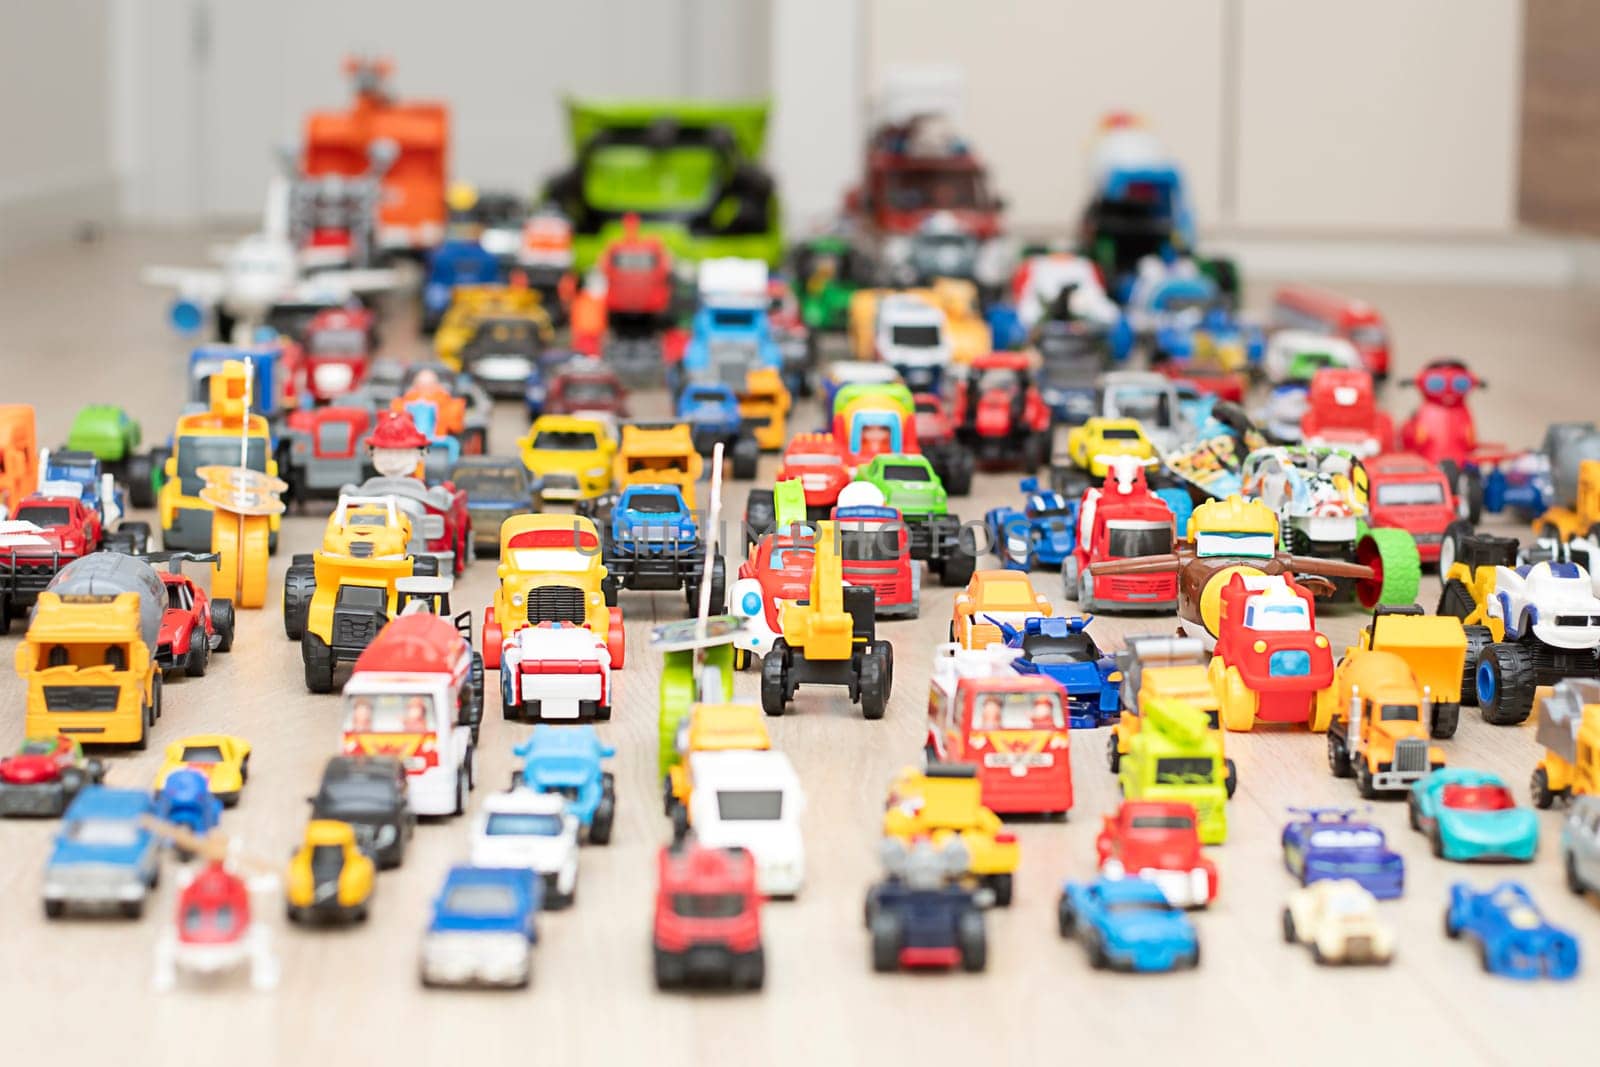 Toy cars, motorcycles, tractors, buses, pickups, many colorful small and large cars are arranged for play on the floor in the children's room. Childhood concept. soft focus.